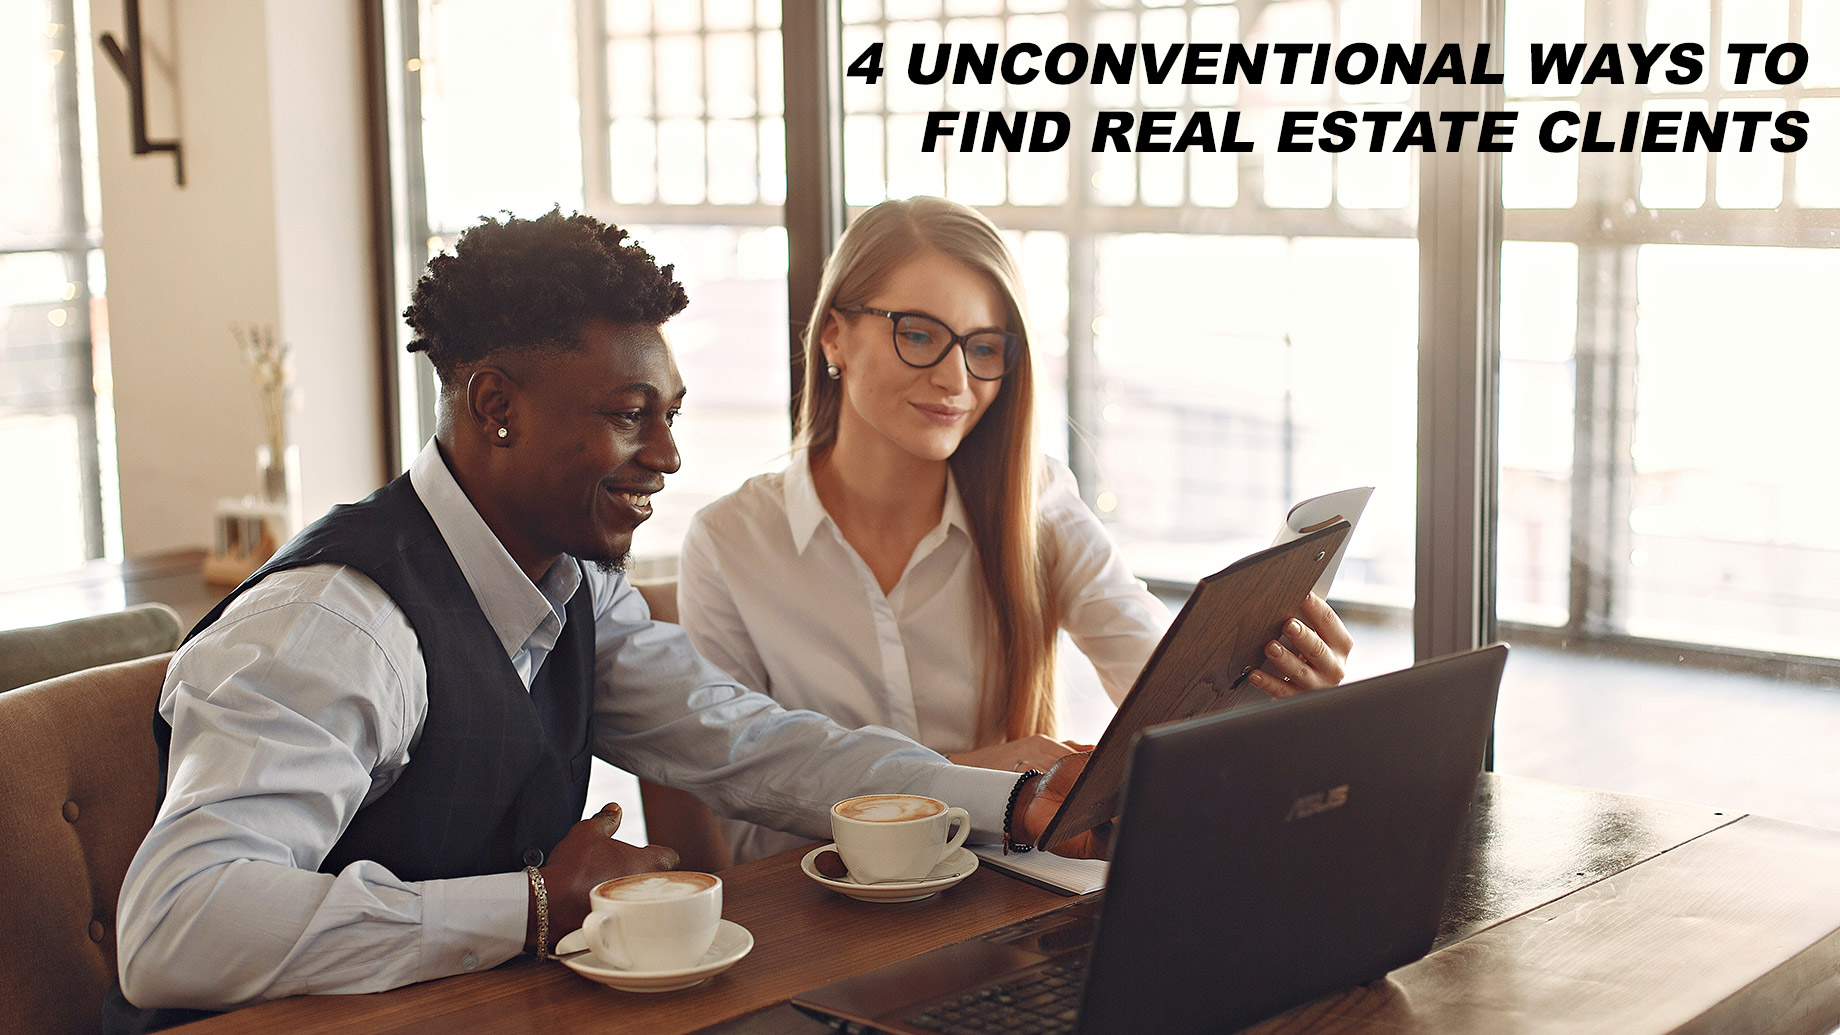 4 Unconventional Ways to Find Real Estate Clients